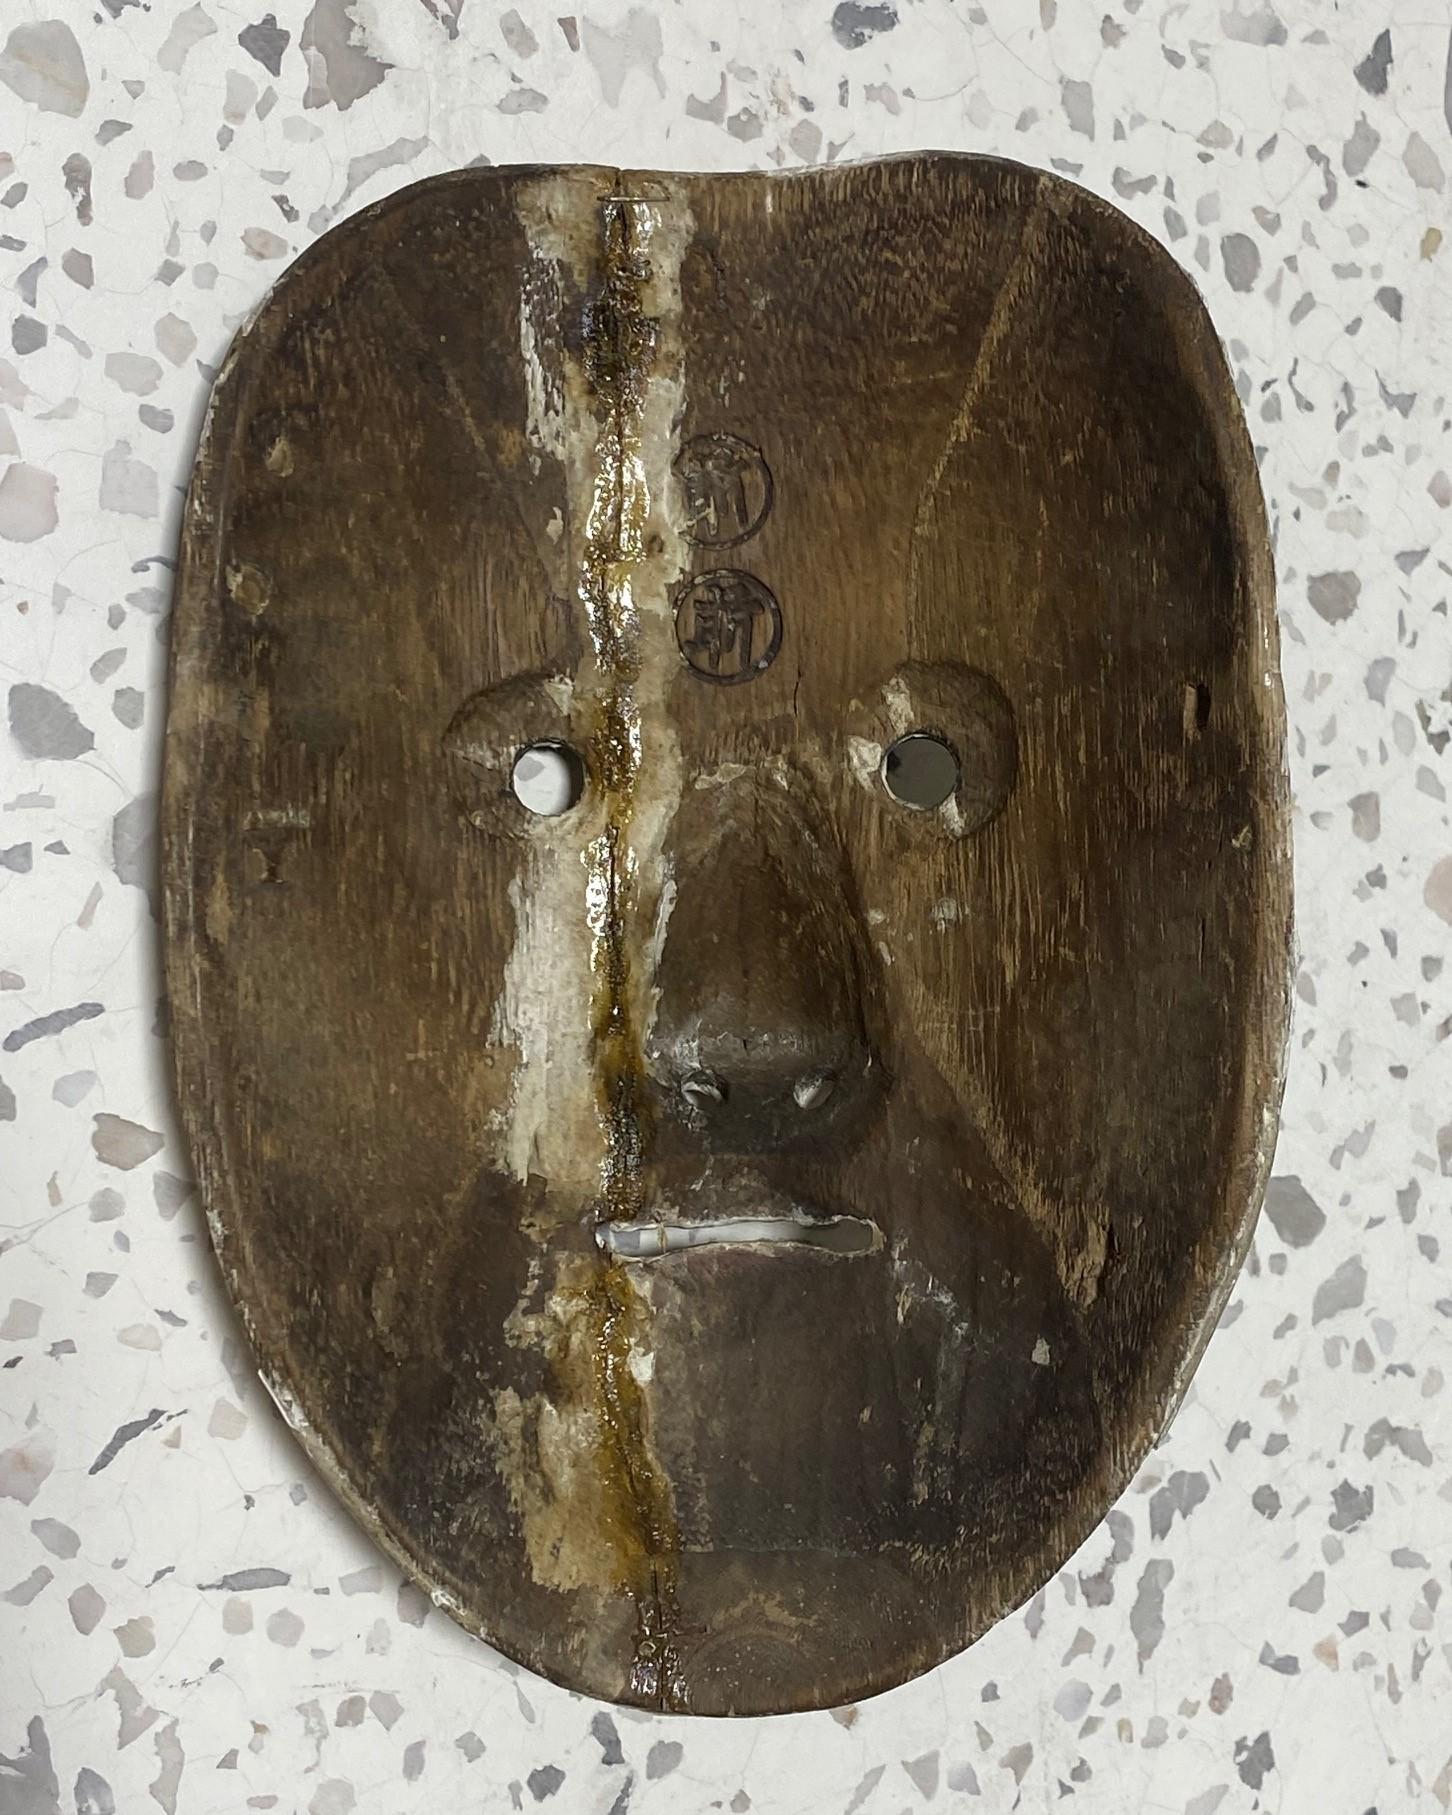 Japanese Antique Edo Signed Wood Noh Theater Mask Ko-Omote 17th-18th Century For Sale 4